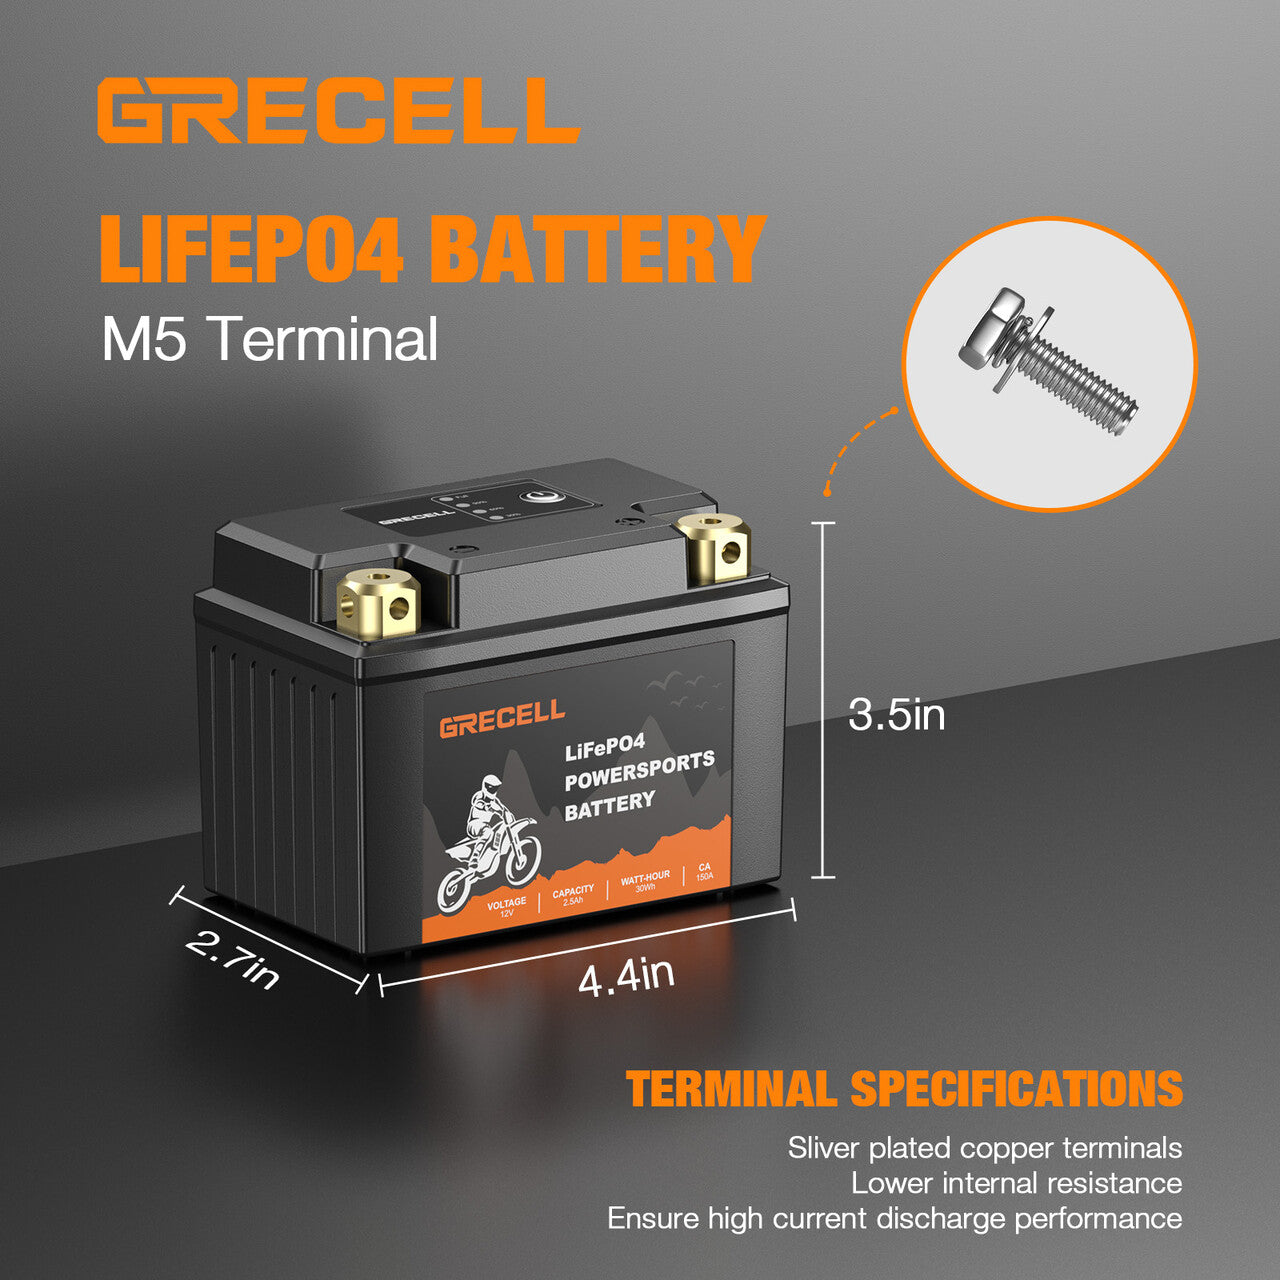 GRECELL Lithium 12V 2.5Ah Motorcycle Battery